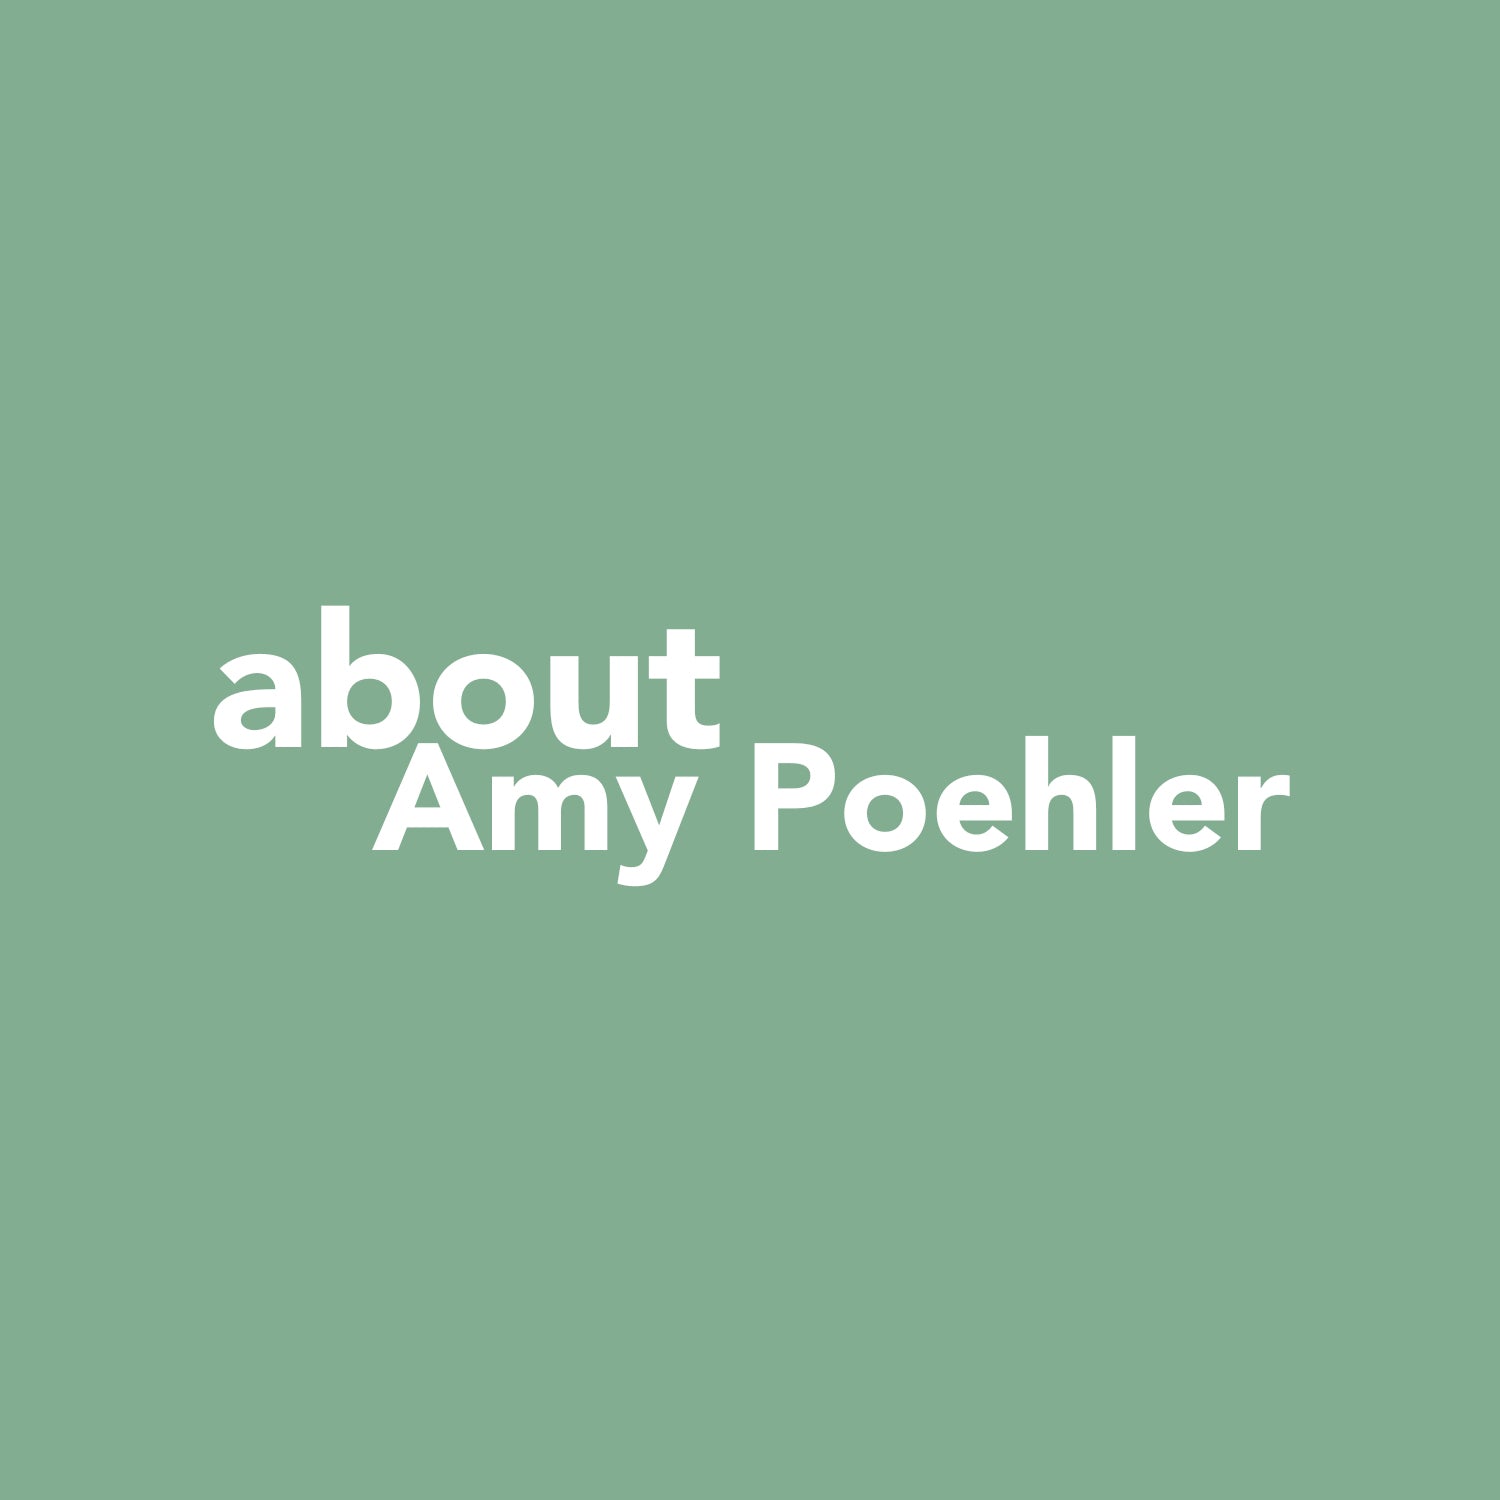 Square green graphic that reads "about Amy Poehler" in white sans serif font.